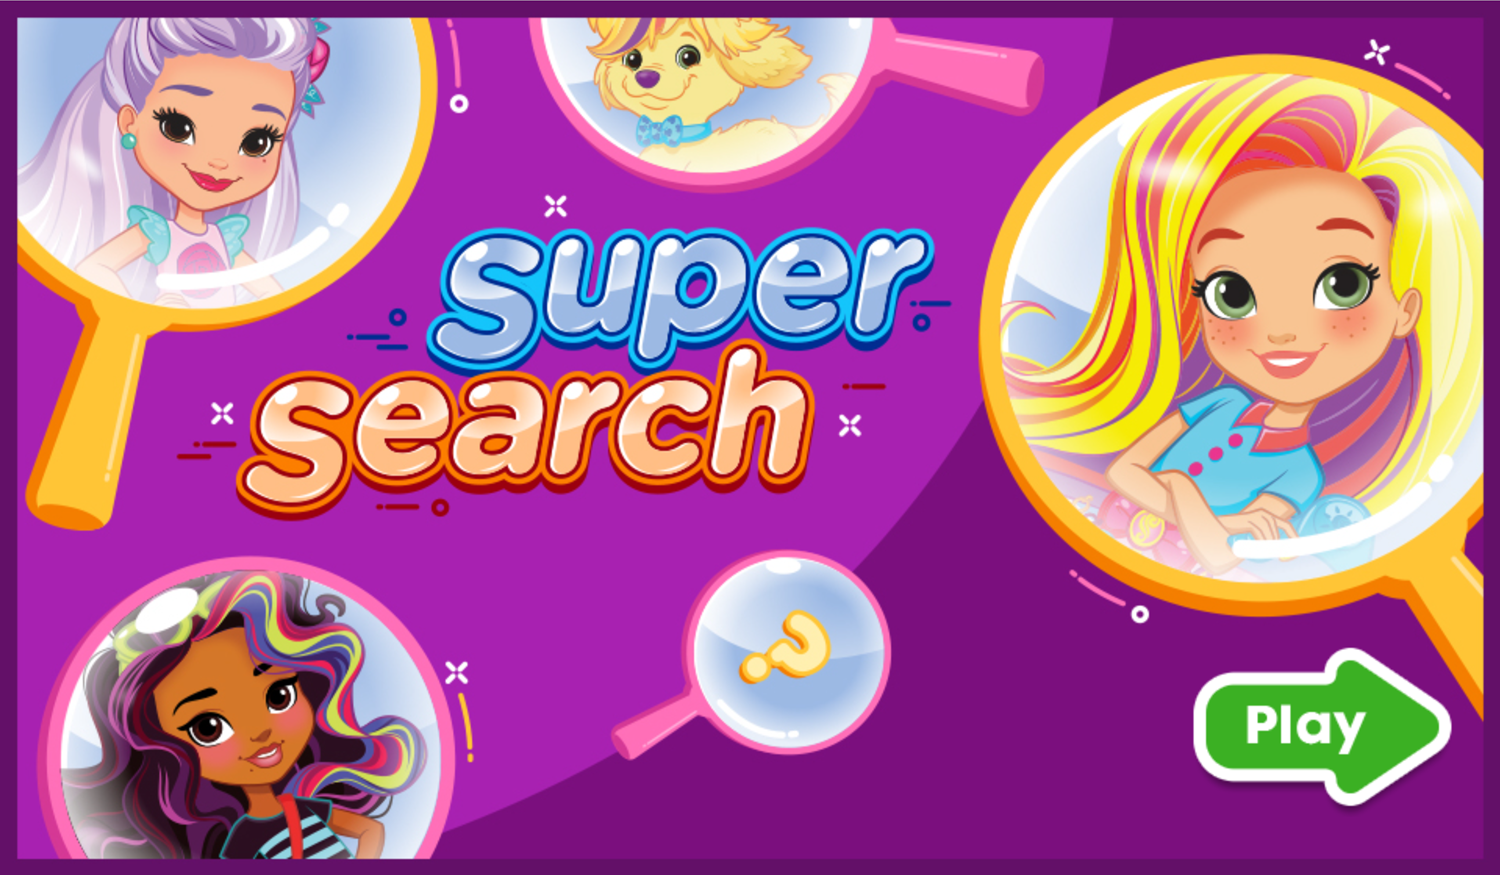 Sunny Day Super Search Game Welcome Screen Screenshot.